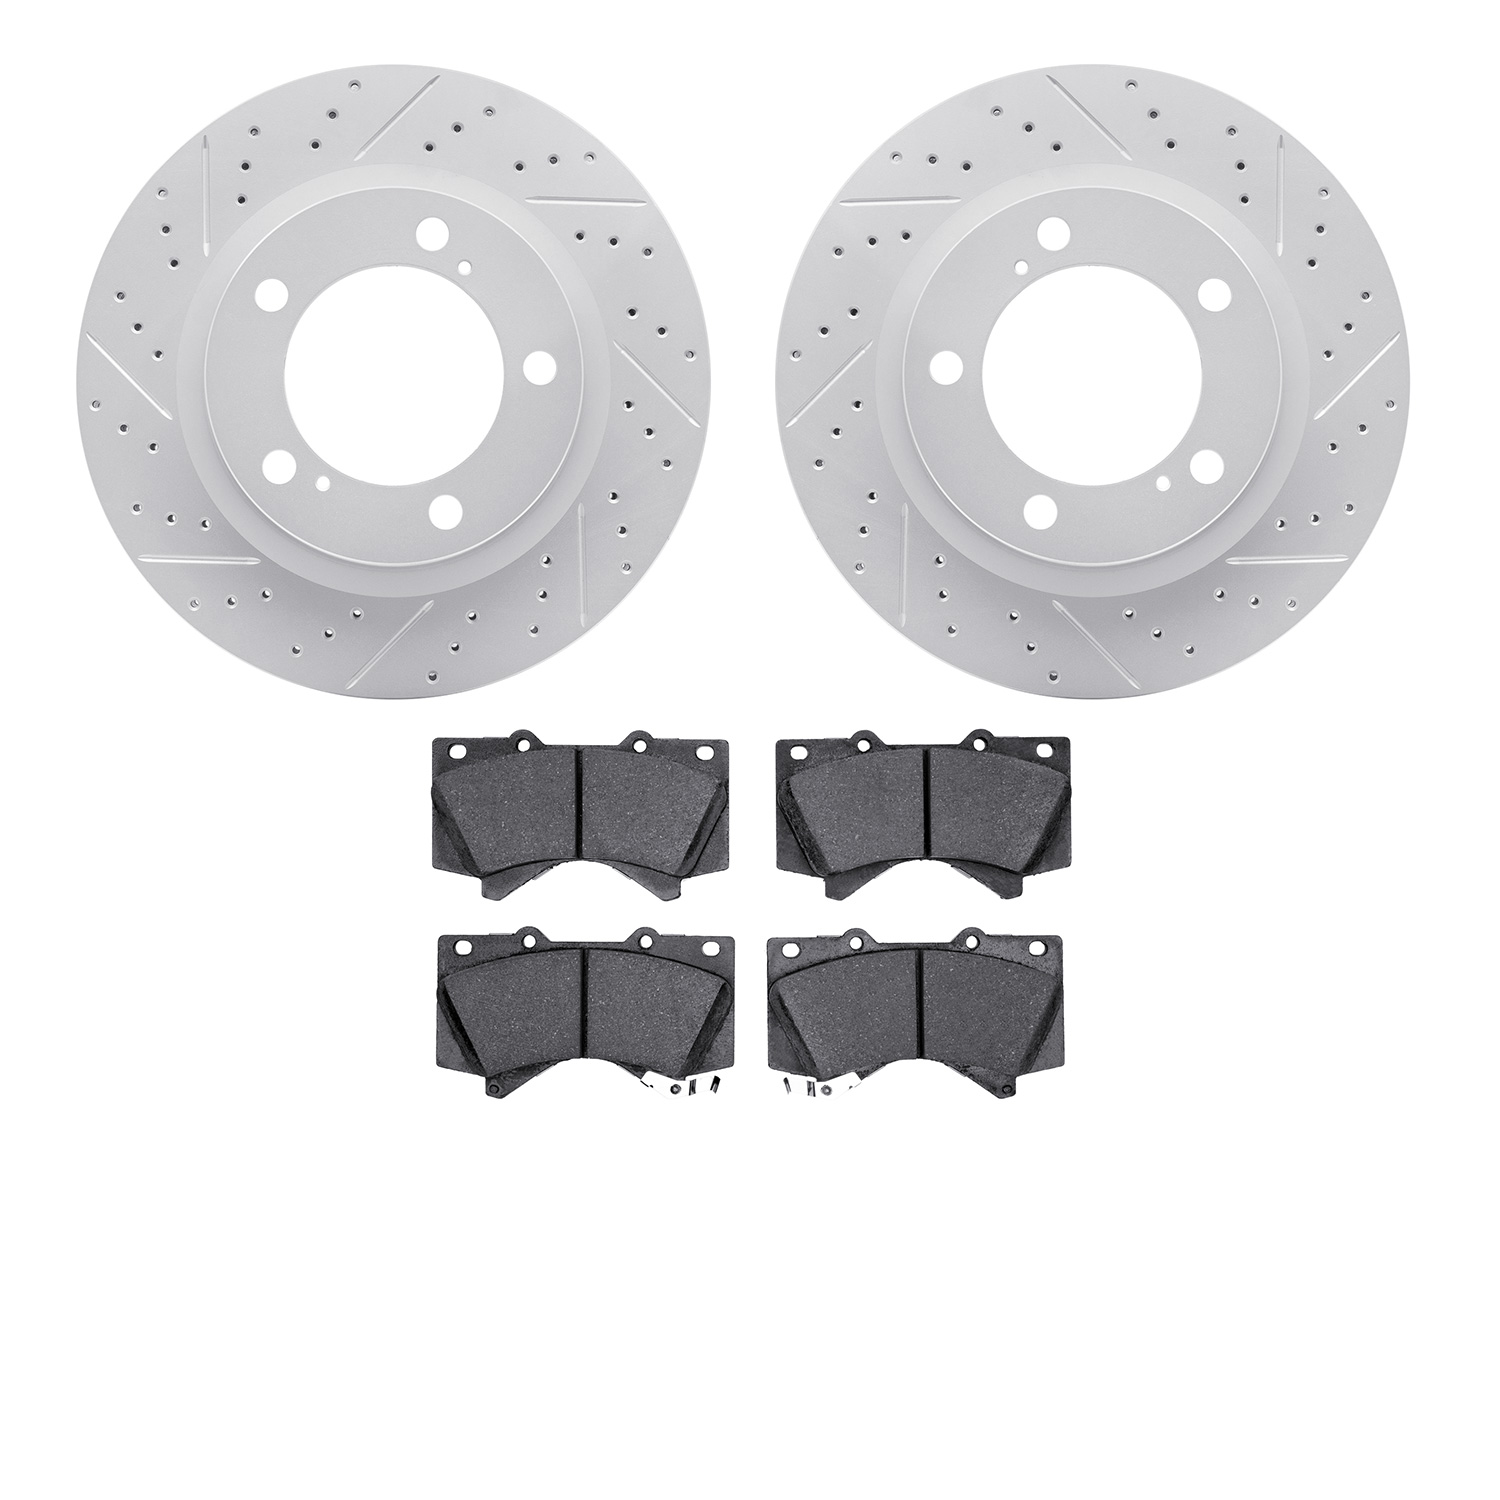 2402-76015 Geoperformance Drilled/Slotted Brake Rotors with Ultimate-Duty Brake Pads Kit, 2008-2021 Lexus/Toyota/Scion, Position